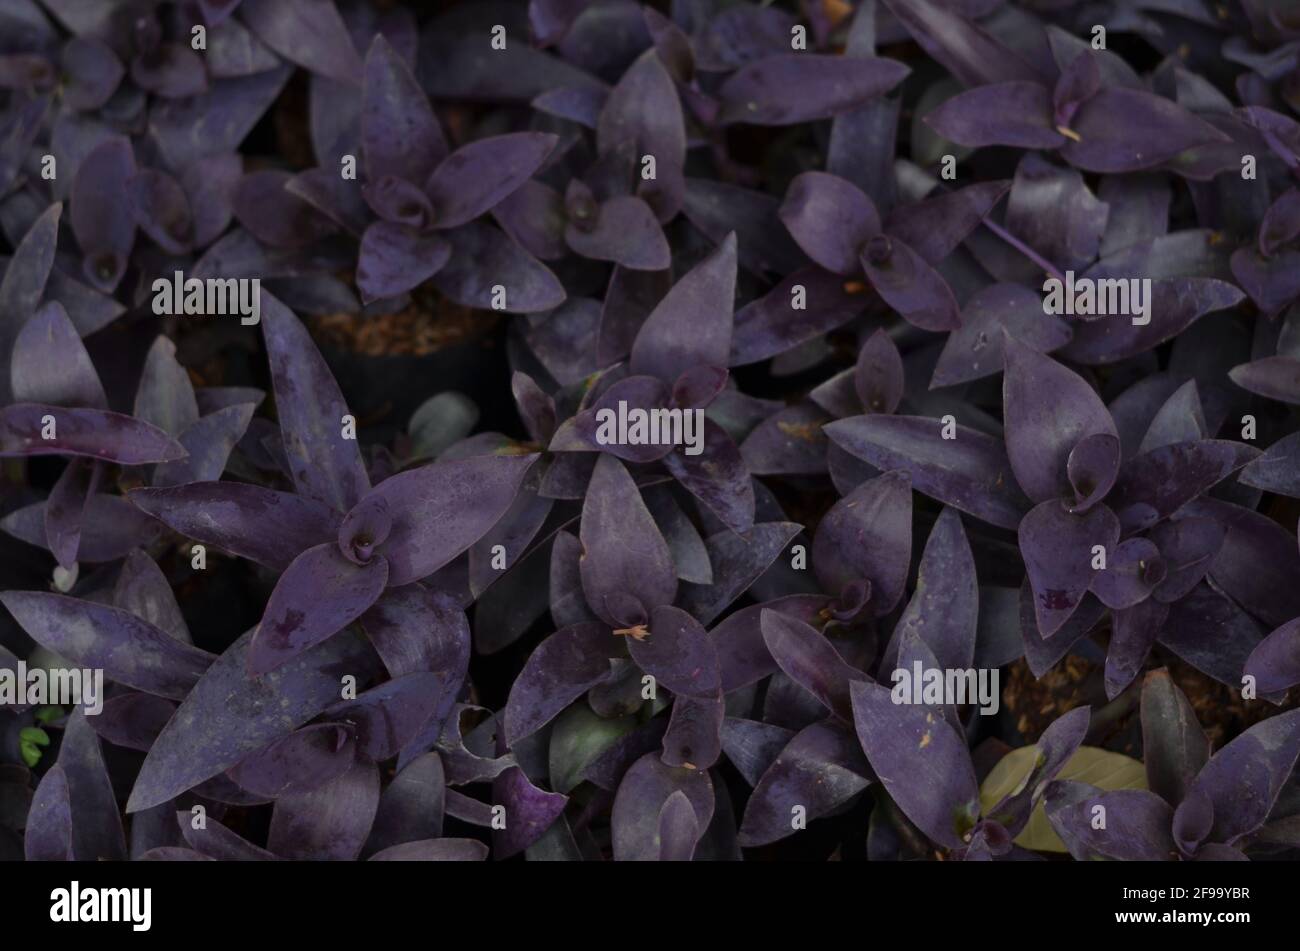 A bunch of purple flowers. Stock Photo